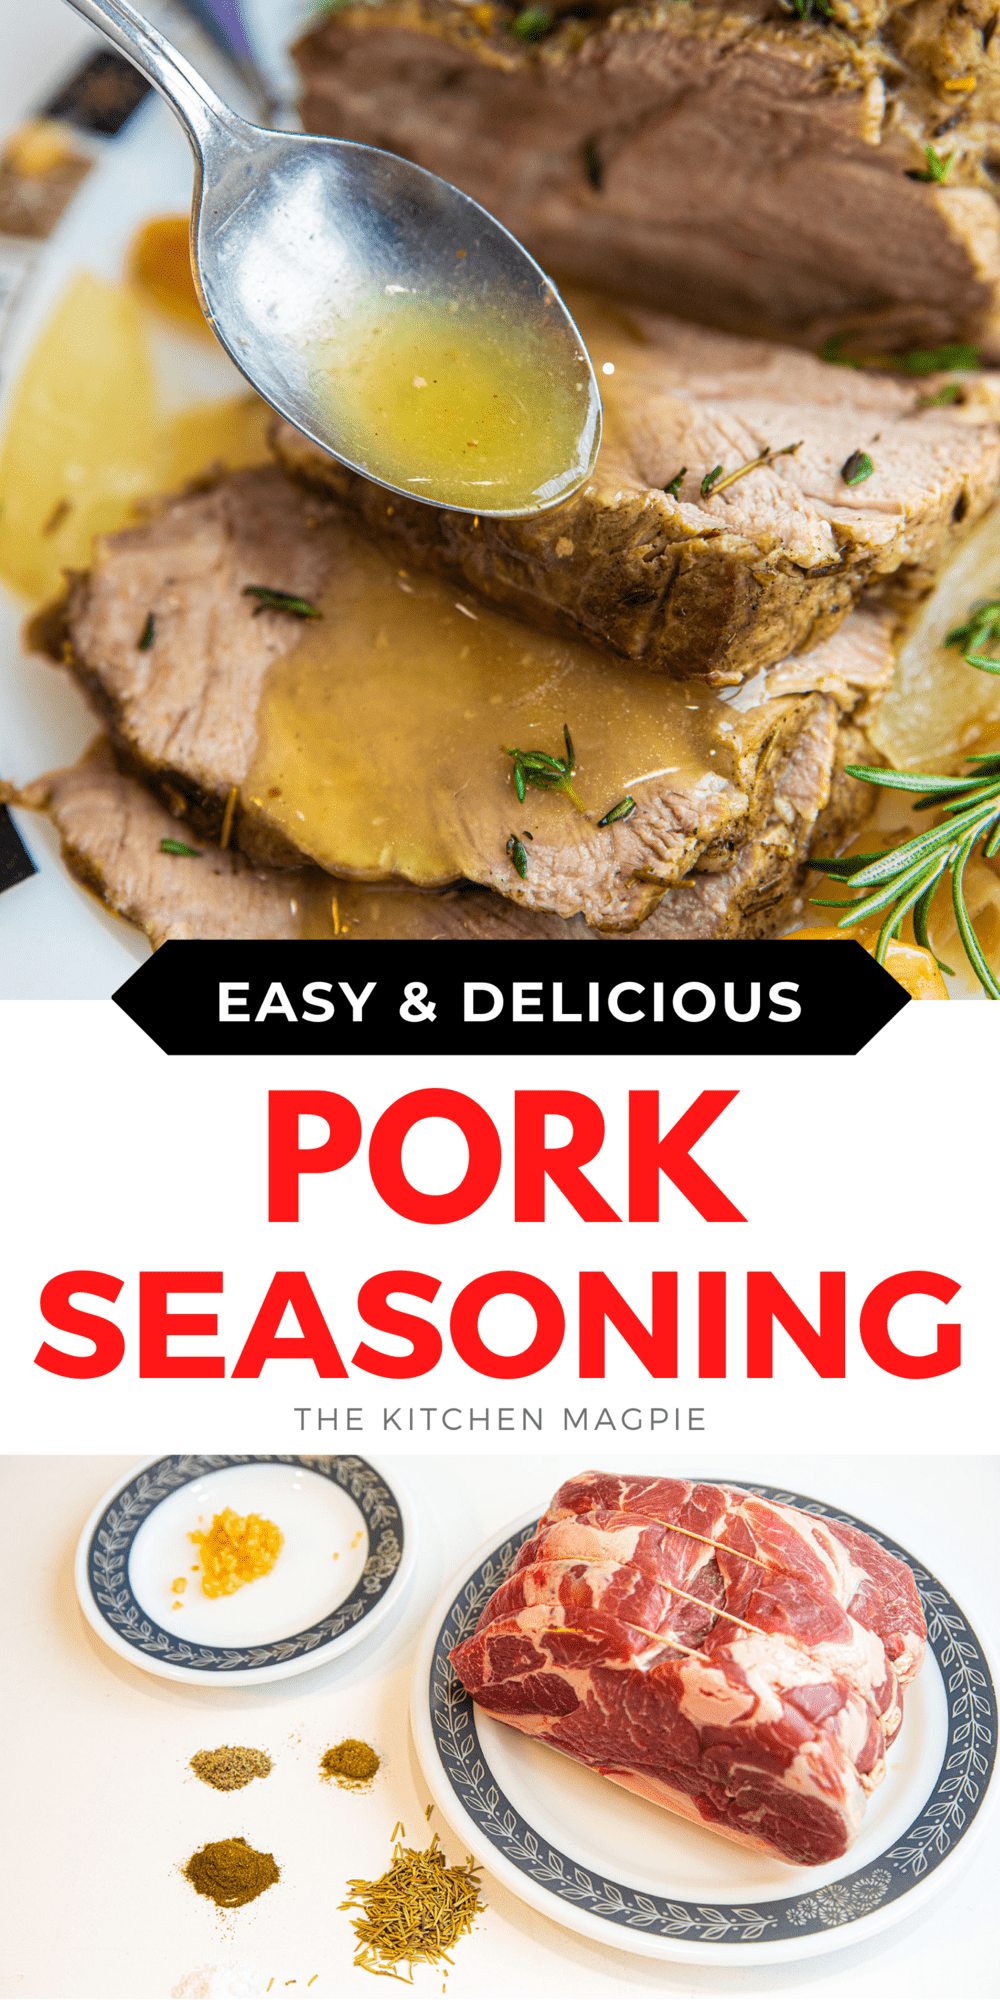 This pork seasoning combines classic flavors that bring out the best of your pork roast, tenderloin, pork chops and more.